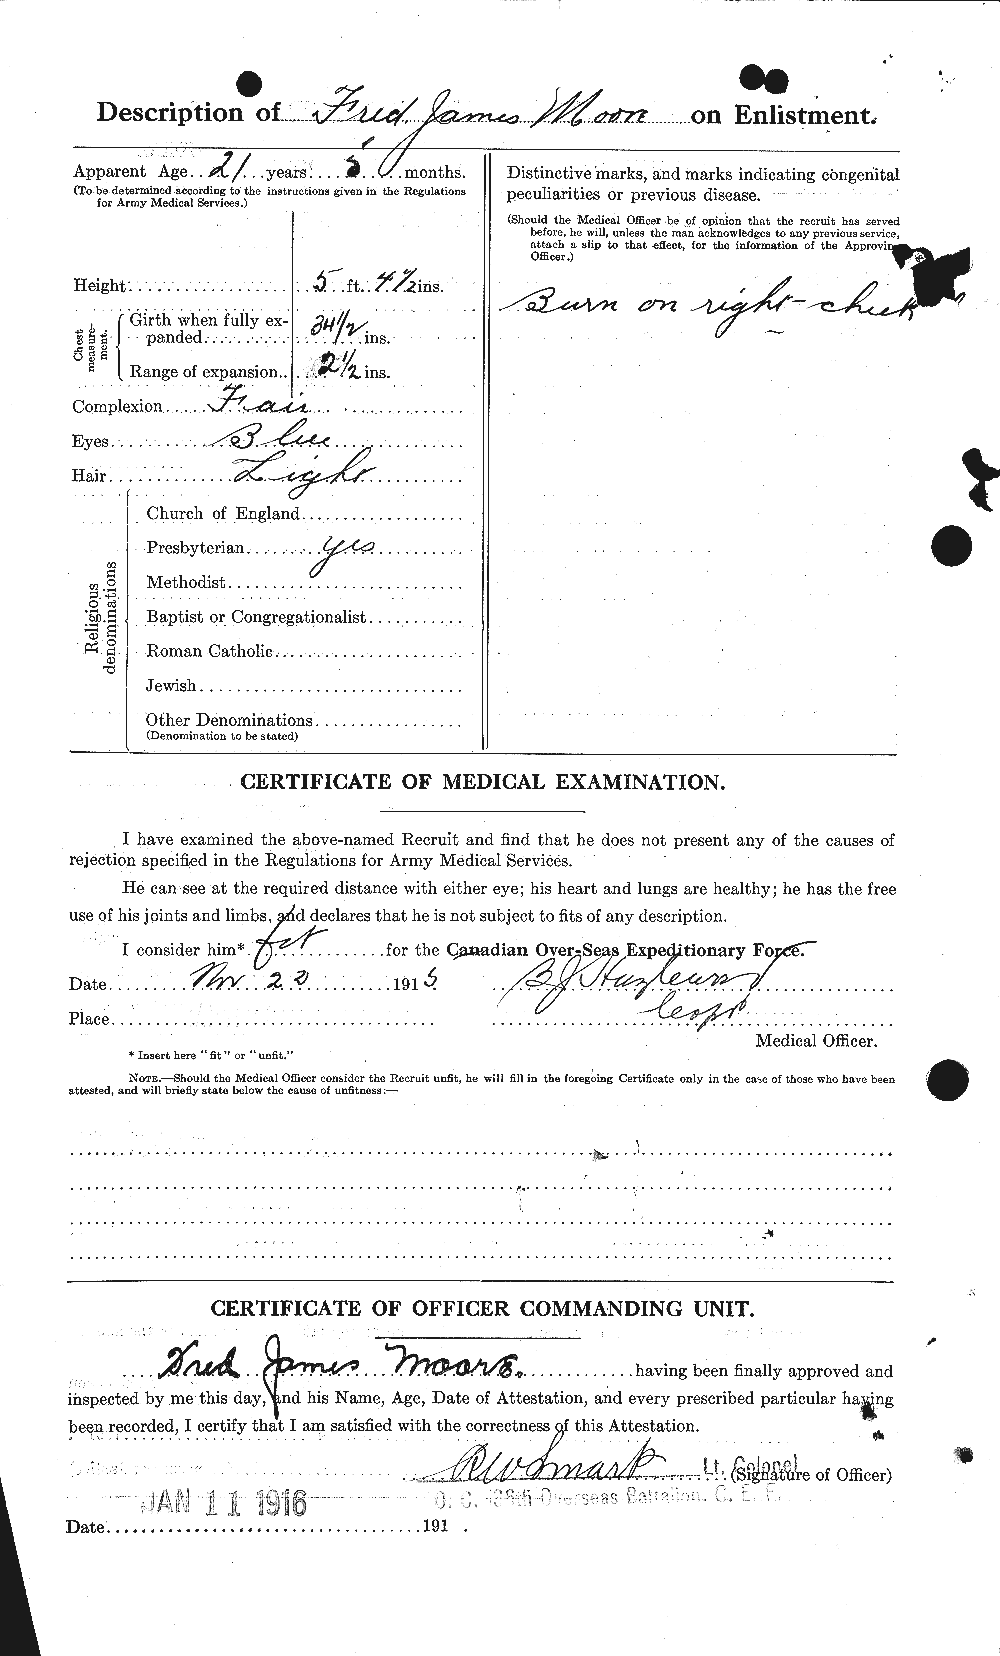 Personnel Records of the First World War - CEF 506750b